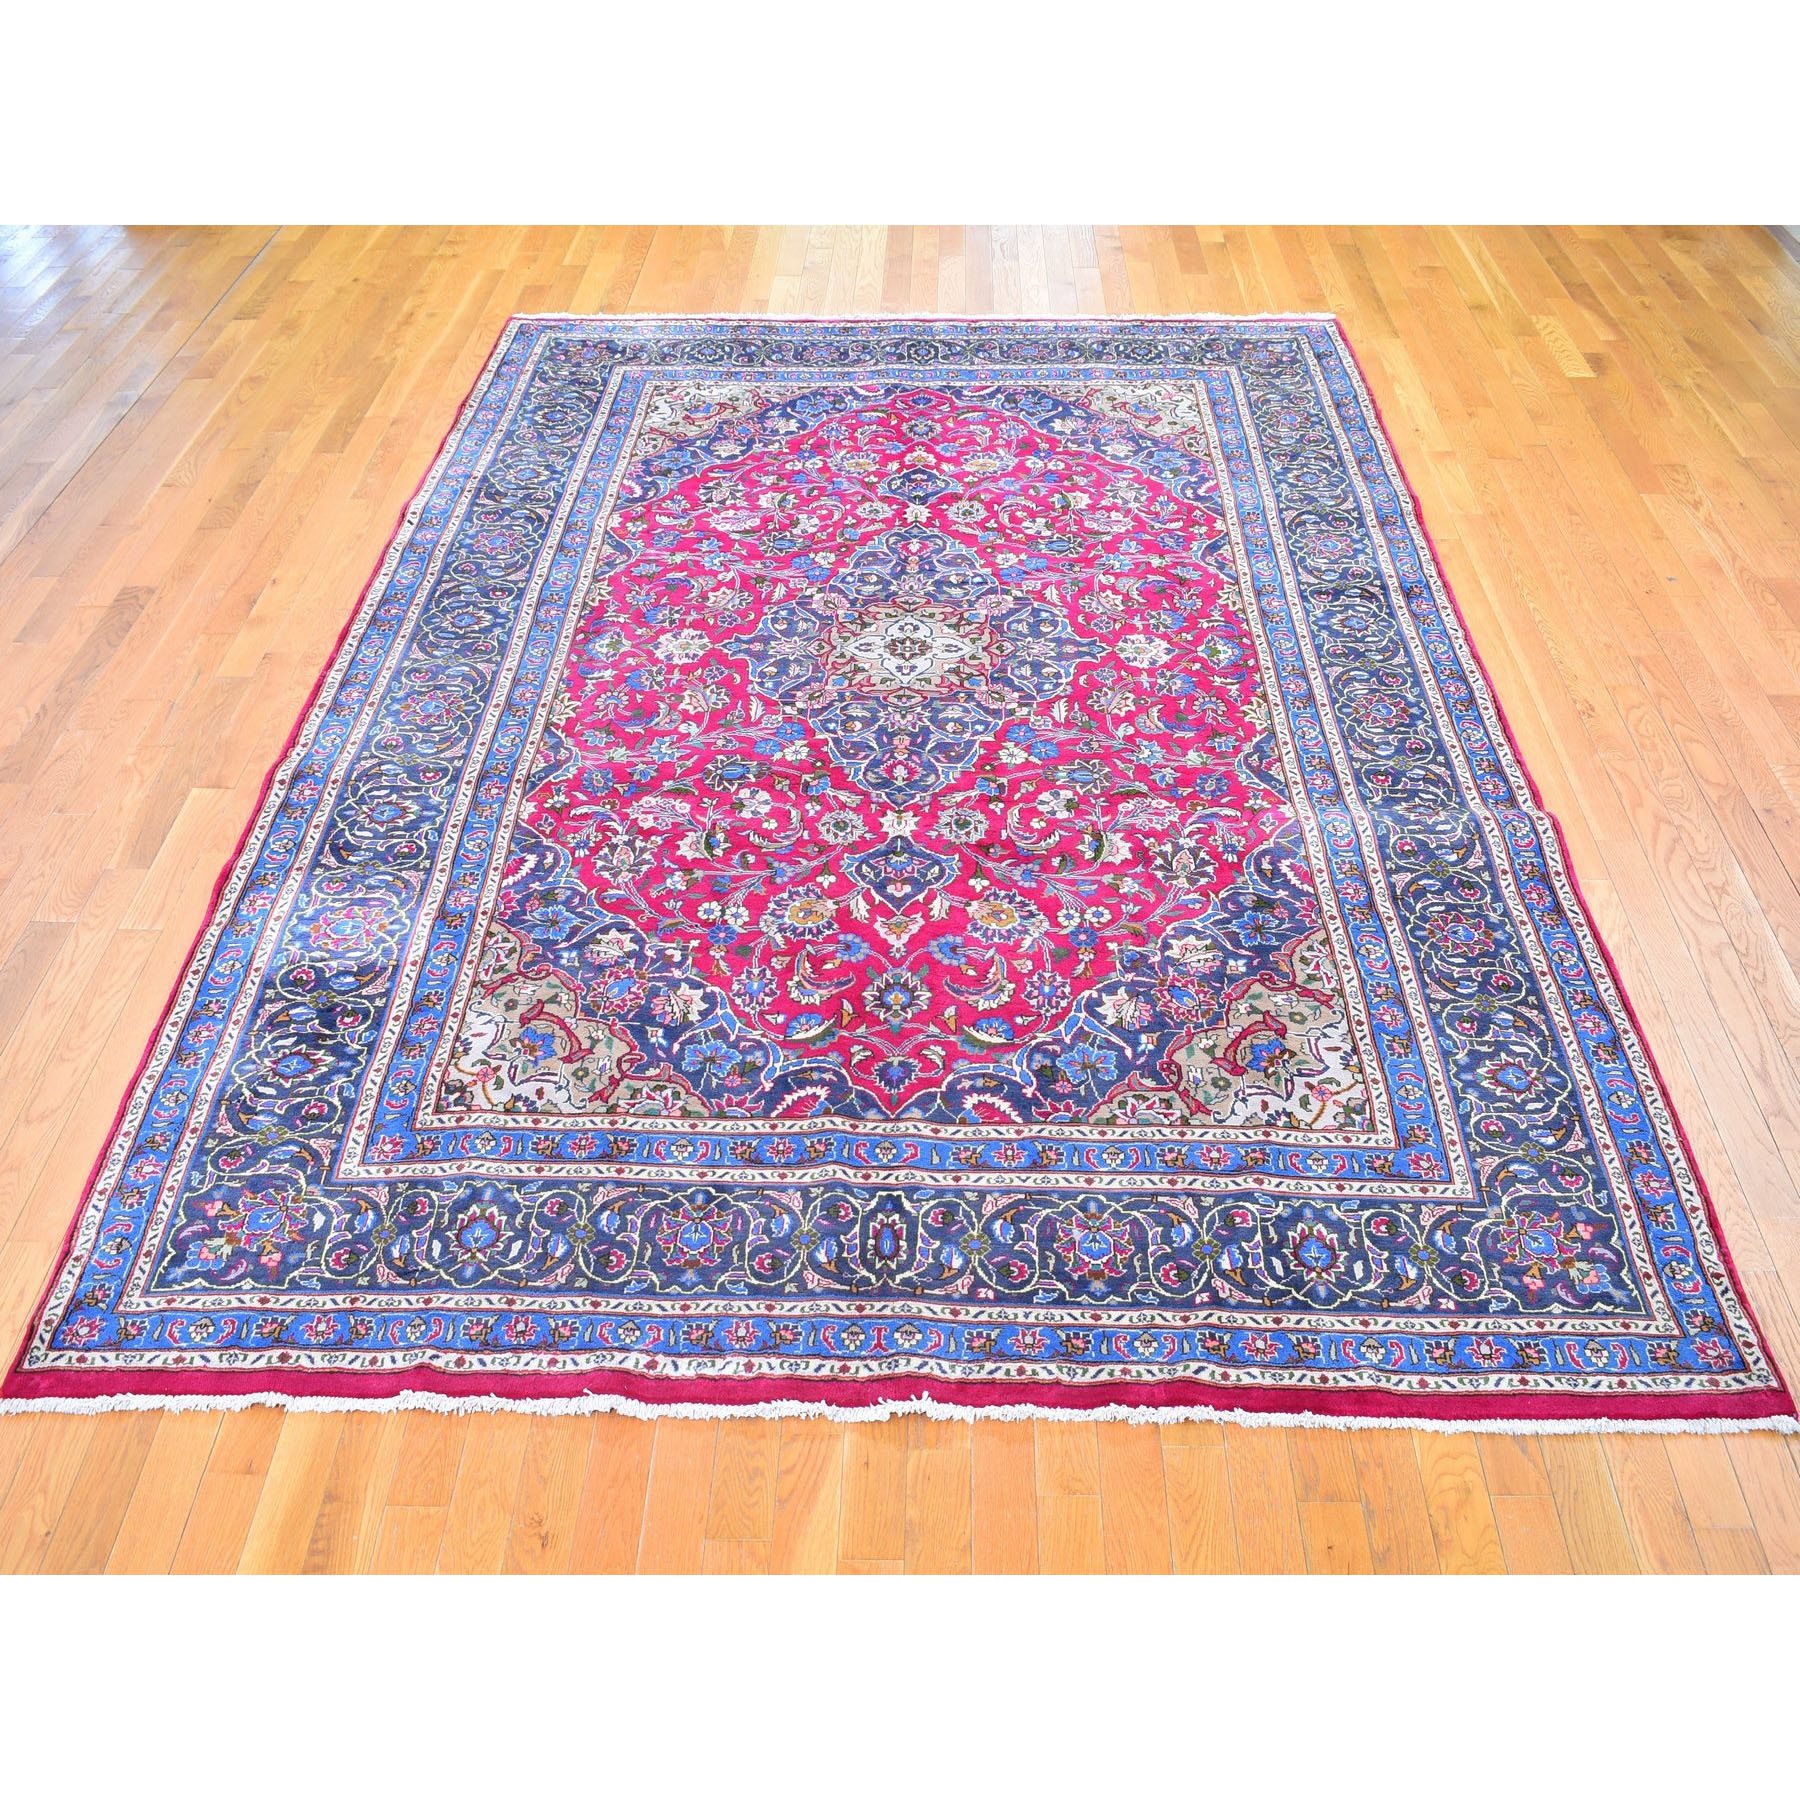 8-x11-7  Red Vintage Persian Mashad Clean Exc Cond Hand Knotted Oriental Rug 